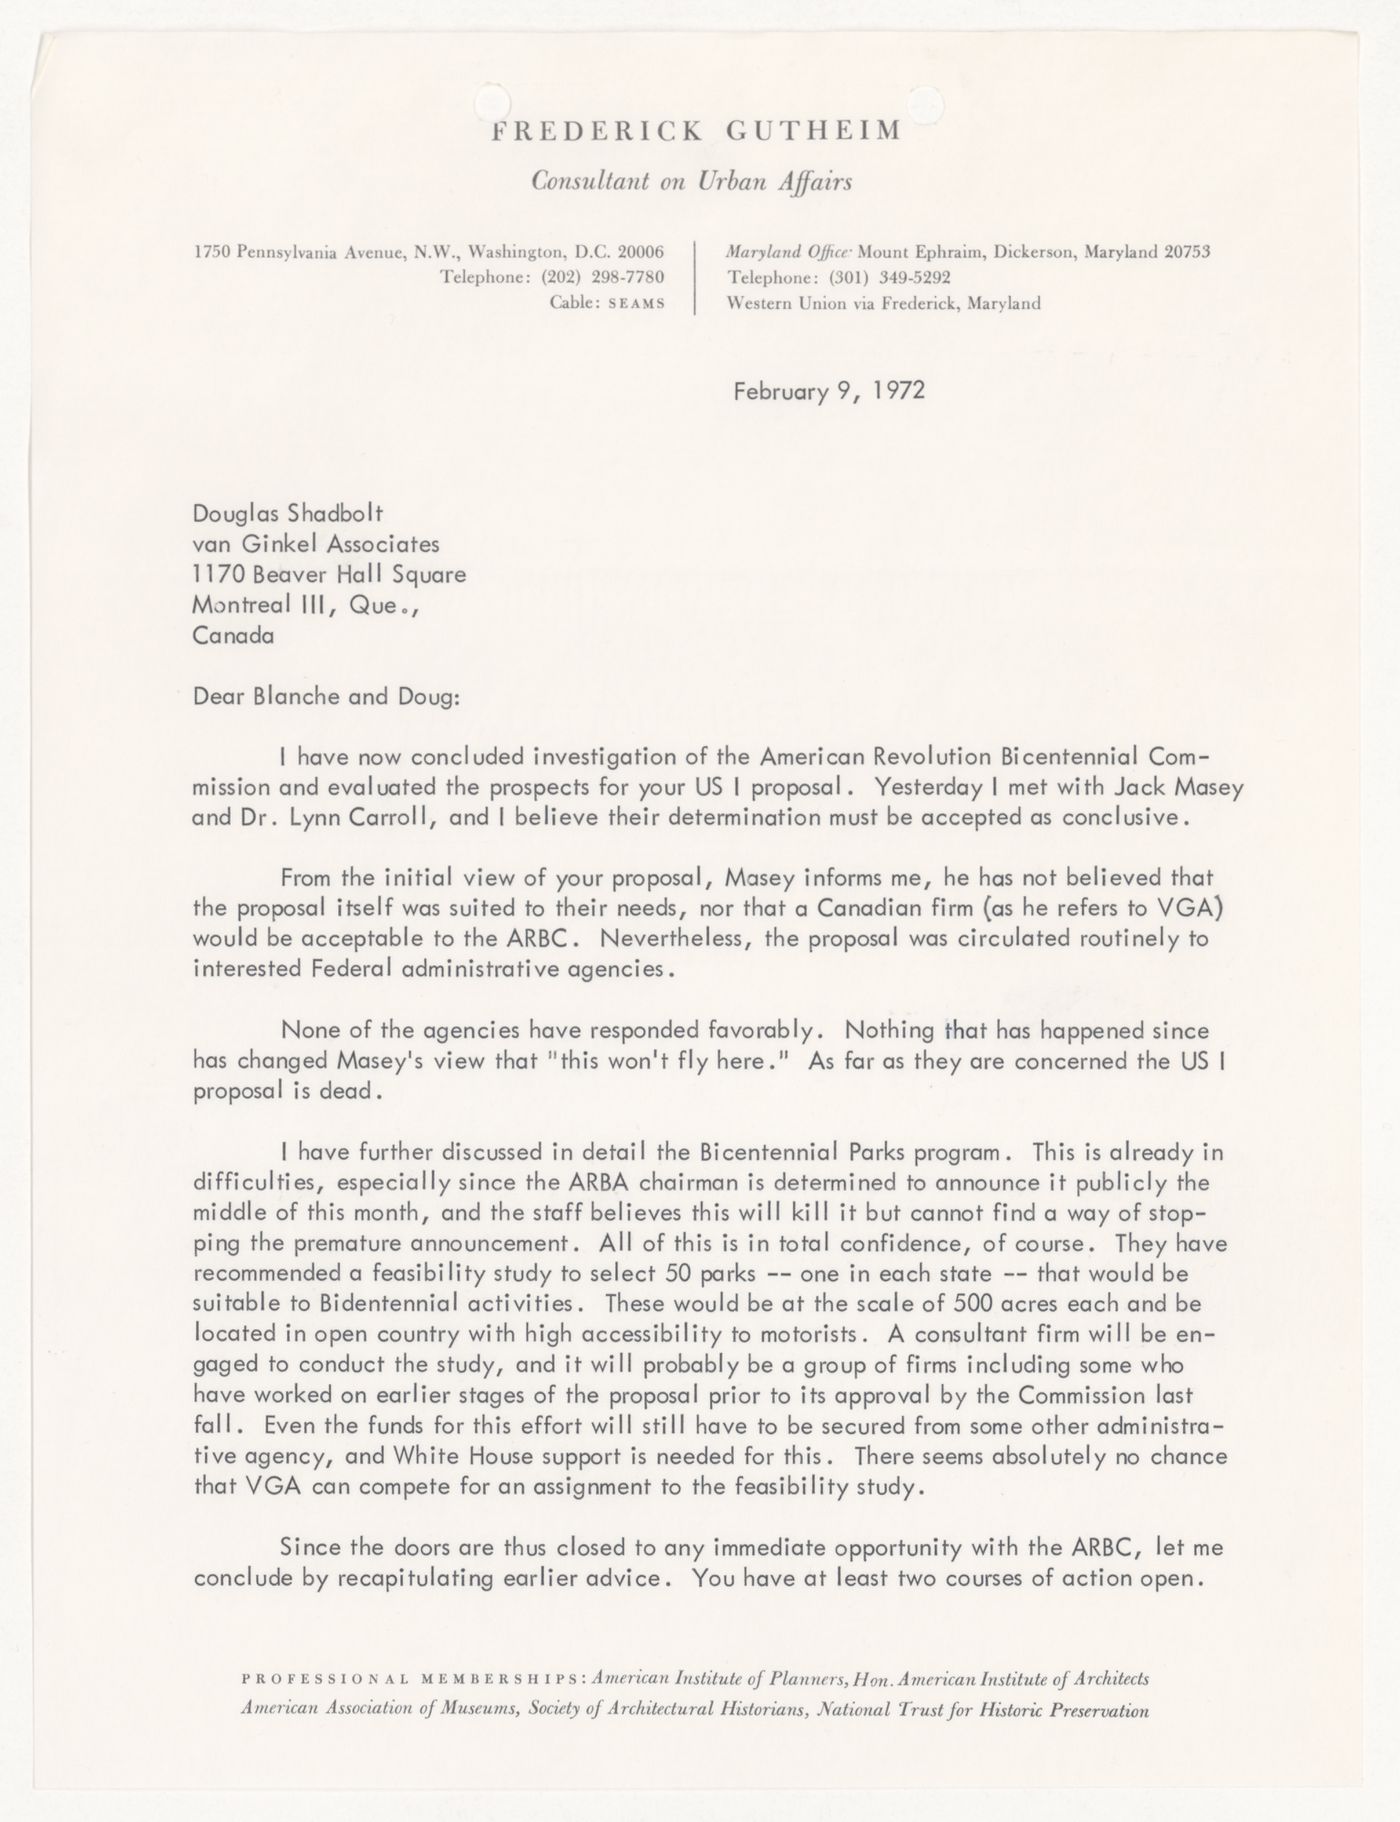 Letter from Frederick Gutheim to Blanche Lemco van Ginkel and Douglas Shadbolt for United States One (U.S. 1)